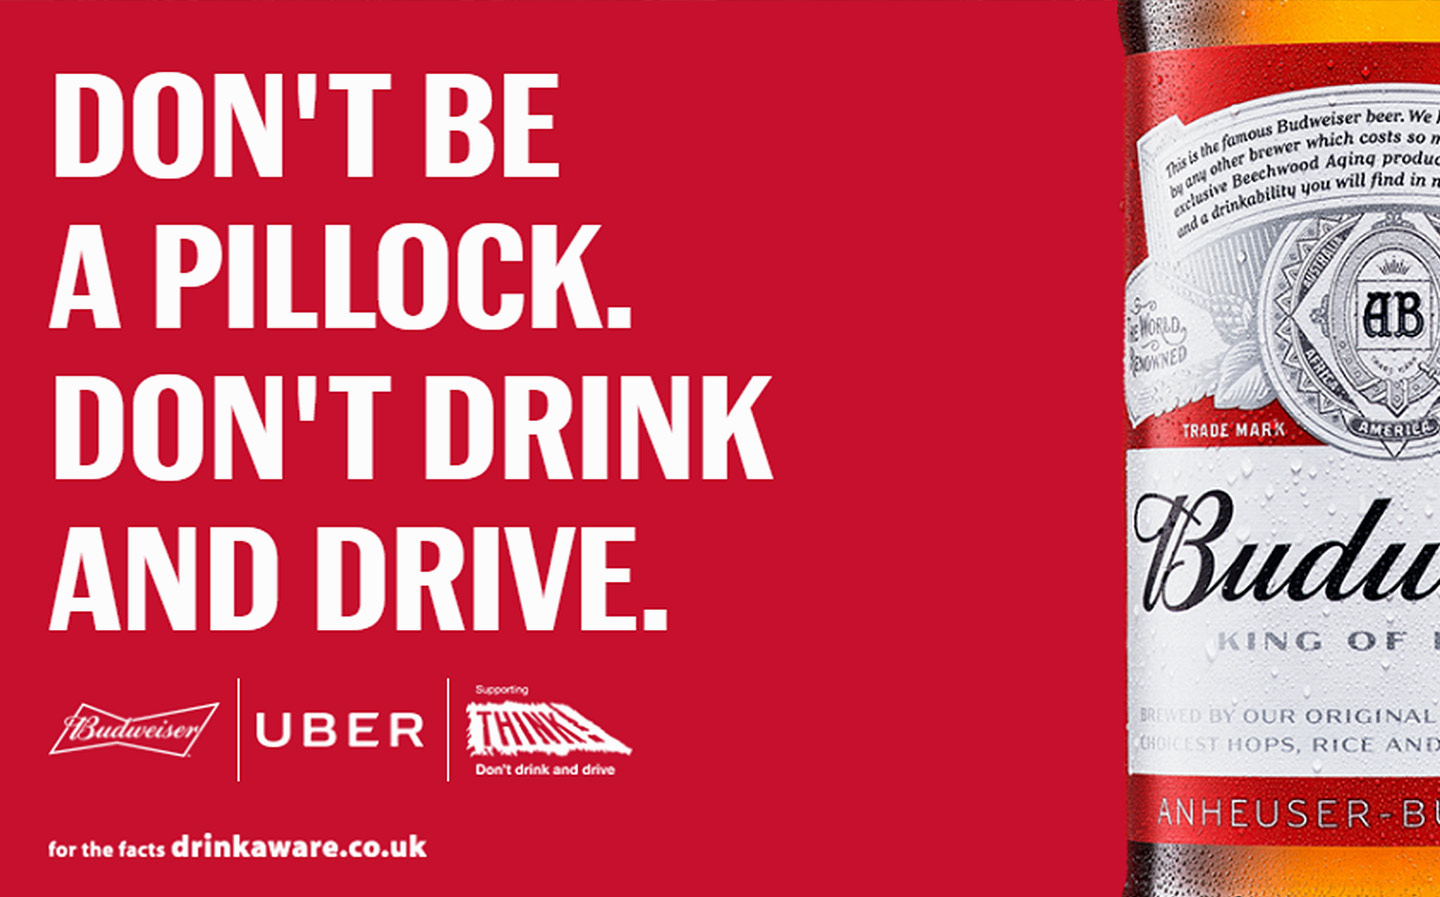 Budweiser says 'don't be a pillock', offers free Uber rides to Christmas Eve drinkers